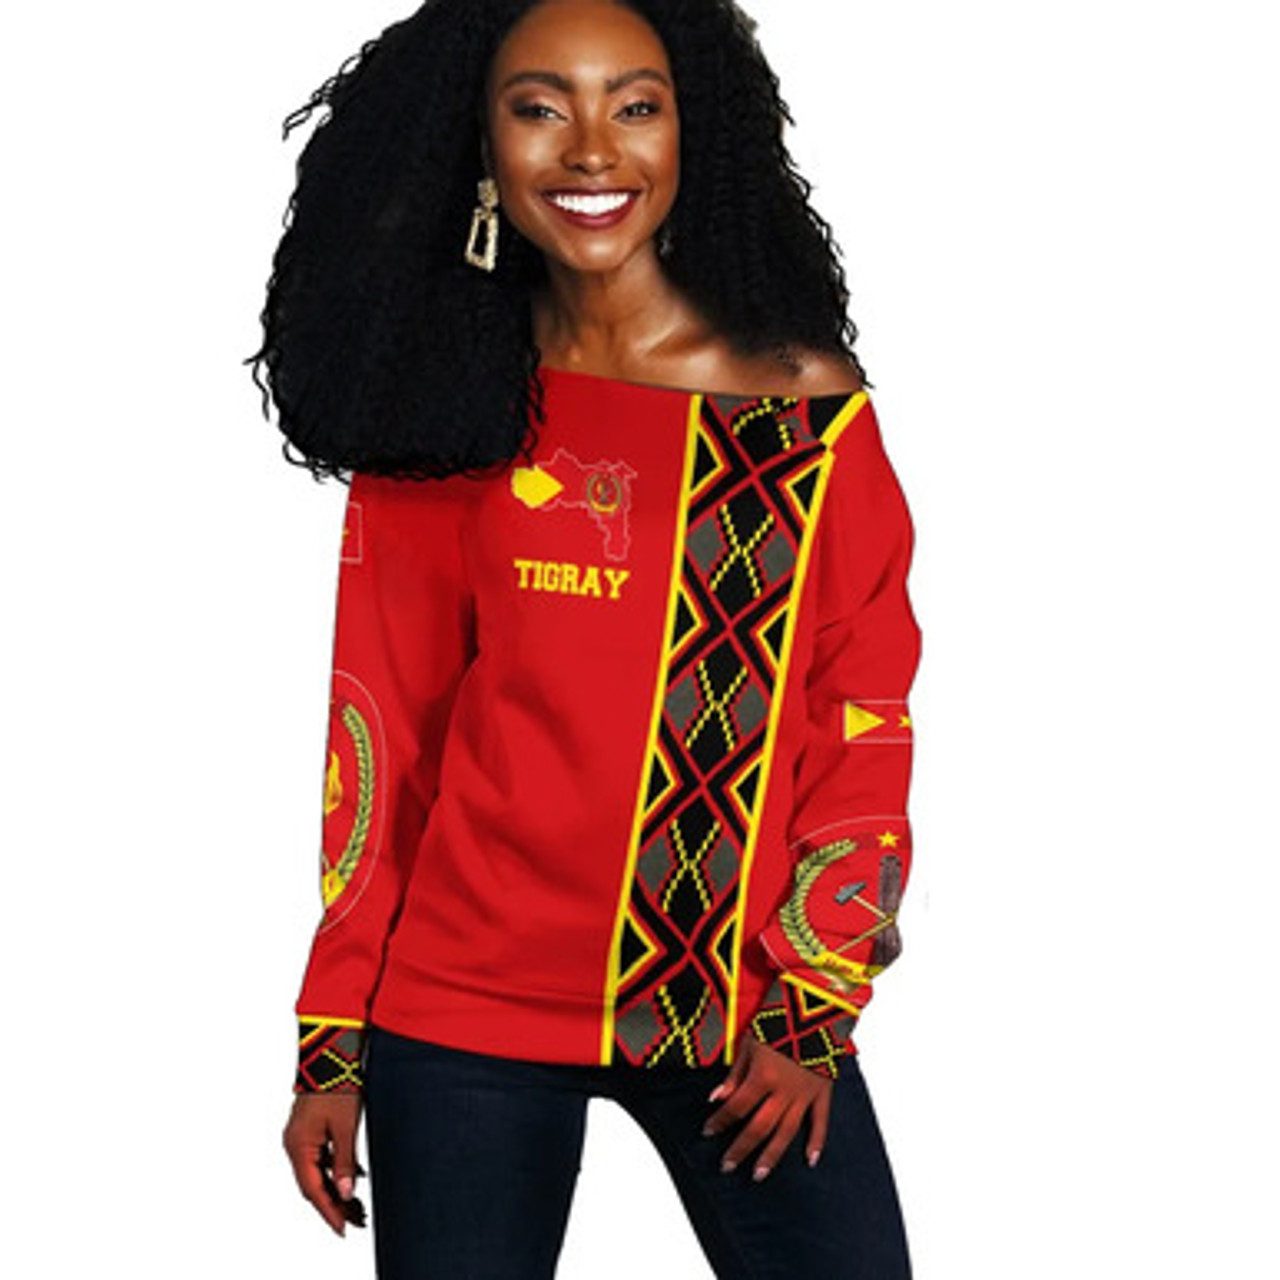 Tigray Off Shoulder Sweater. Tigray Maps Africa Pattern Red